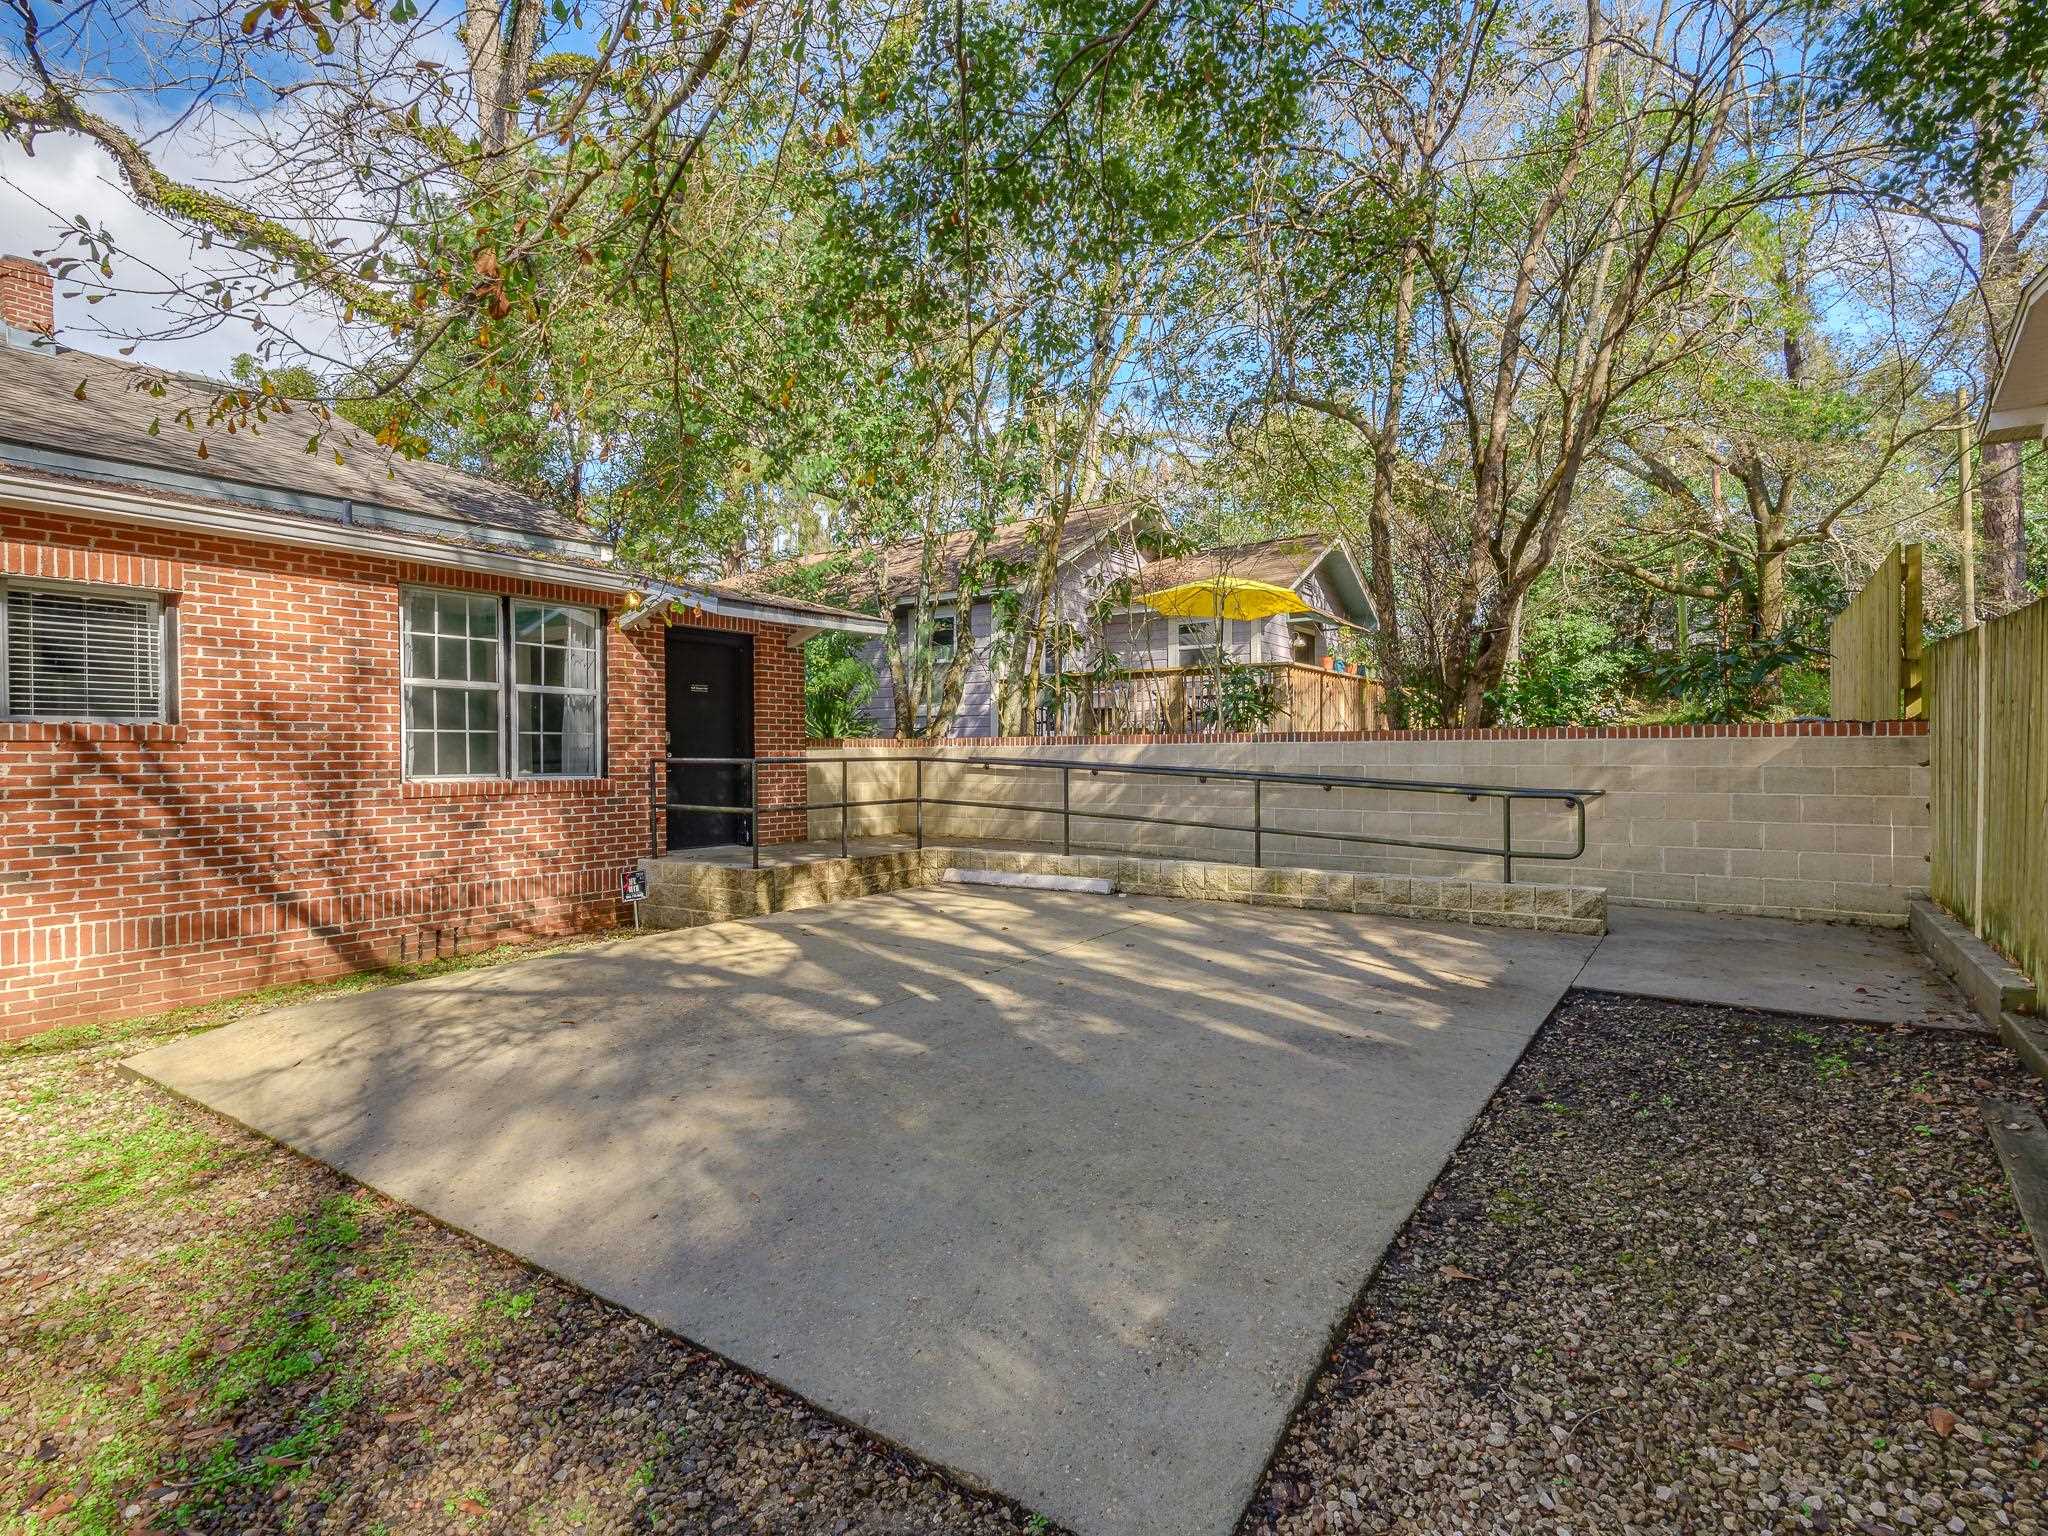 109 W 4th Avenue,TALLAHASSEE,Florida 32303,3 Bedrooms Bedrooms,2 BathroomsBathrooms,Detached single family,109 W 4th Avenue,368581